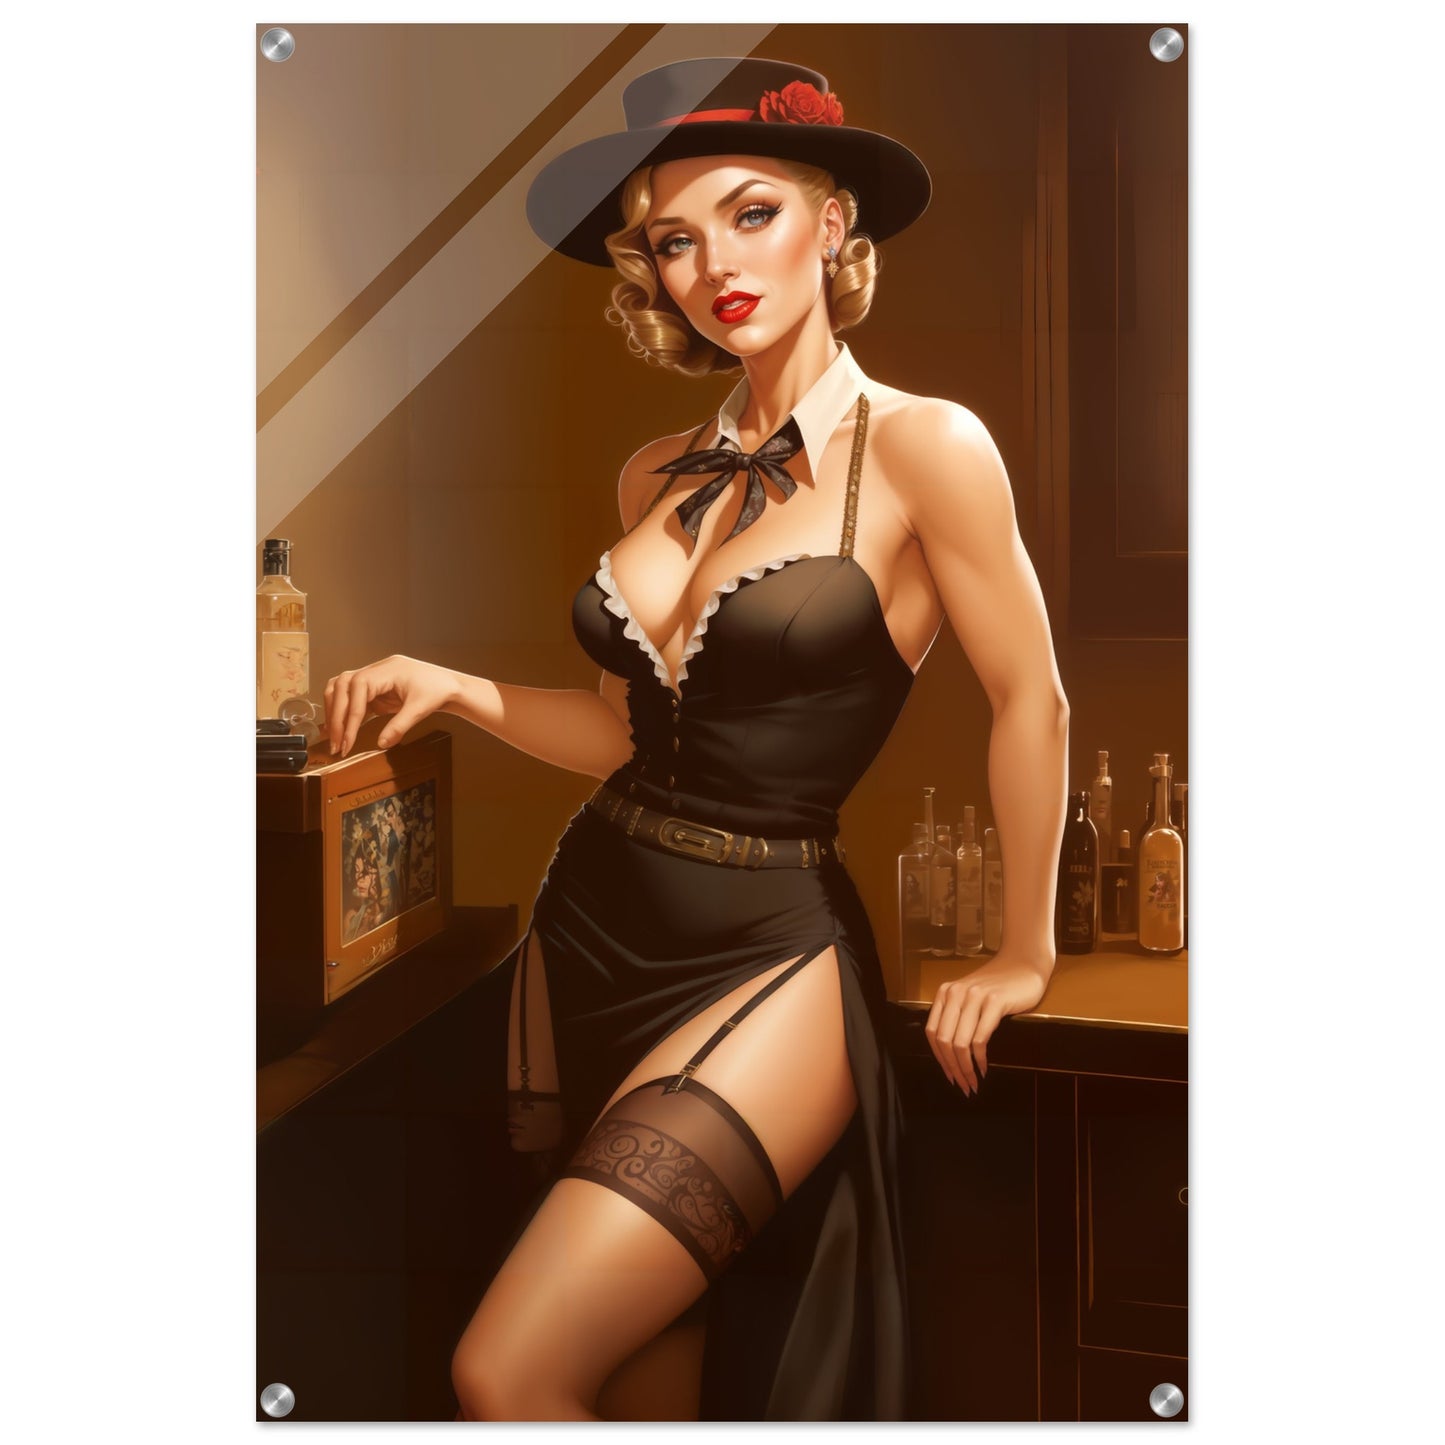 The Daily Pinup #97 - Gangster Gal Wall Art